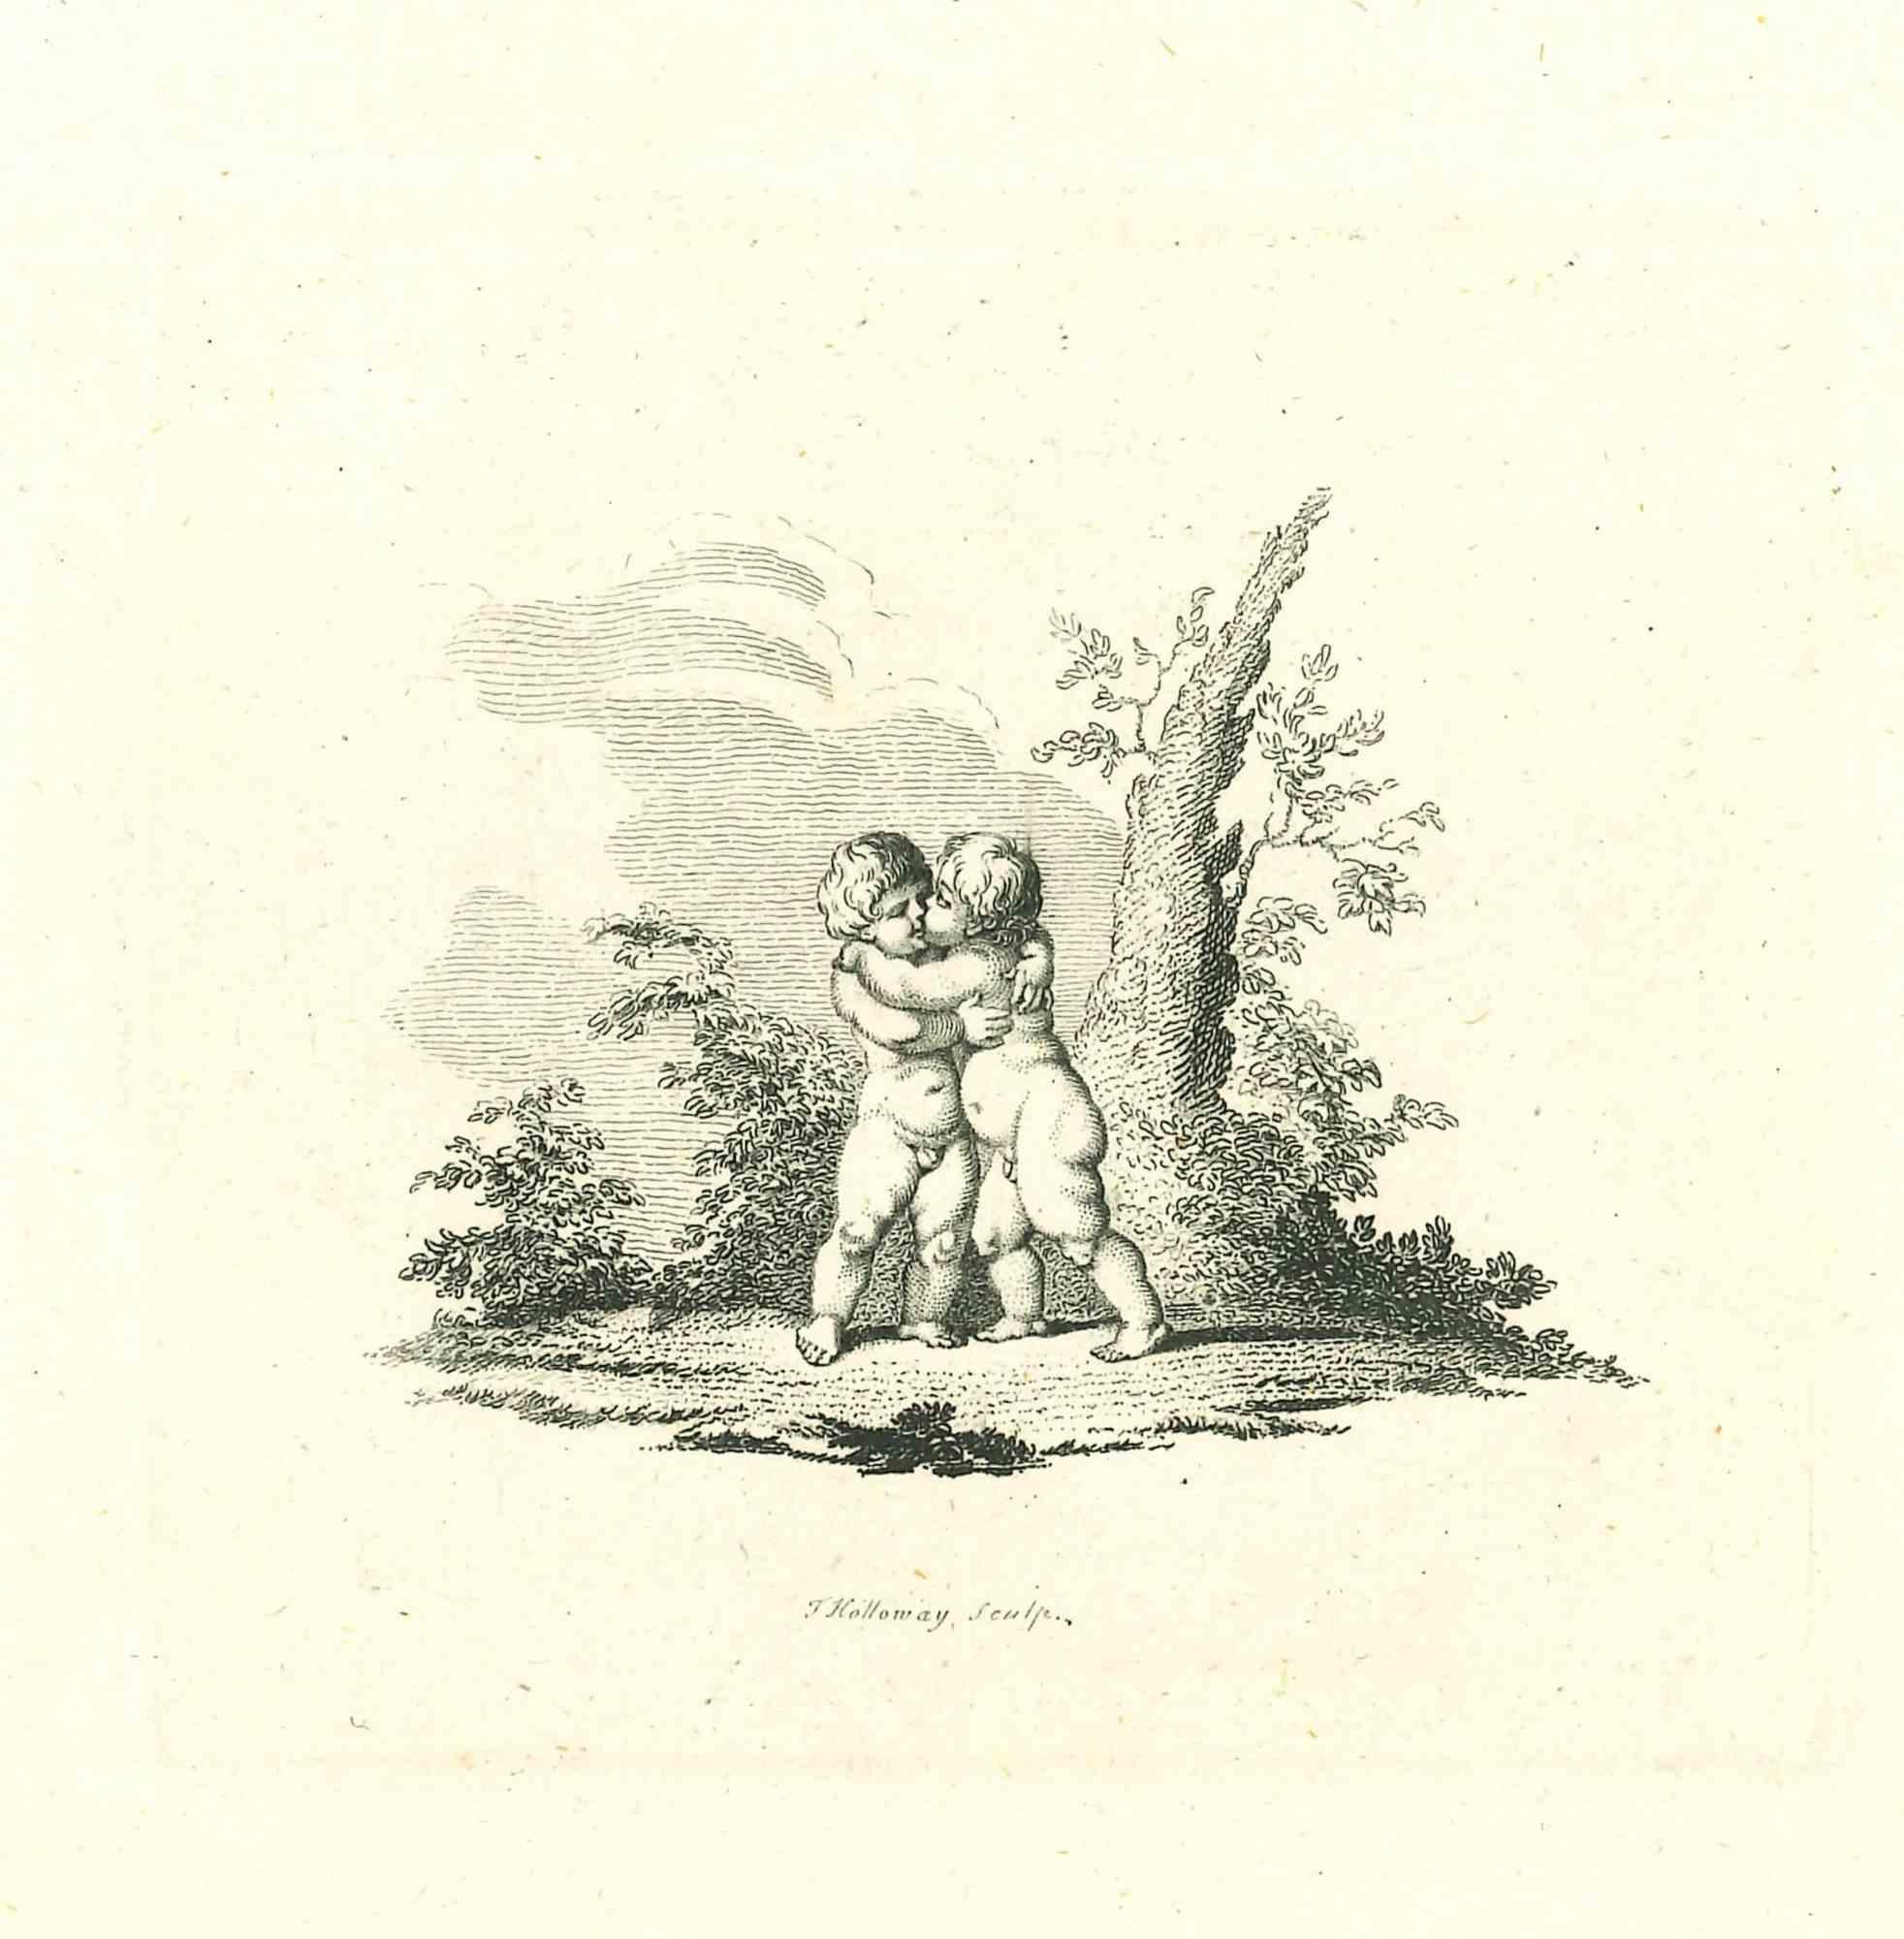 Representation of Love is an original artwork realized by Thomas Holloway for Johann Caspar Lavater's  "Essays on Physiognomy, Designed to promote the Knowledge and the Love of Mankind", London, Bensley, 1810. 

 This artwork portrays a historical